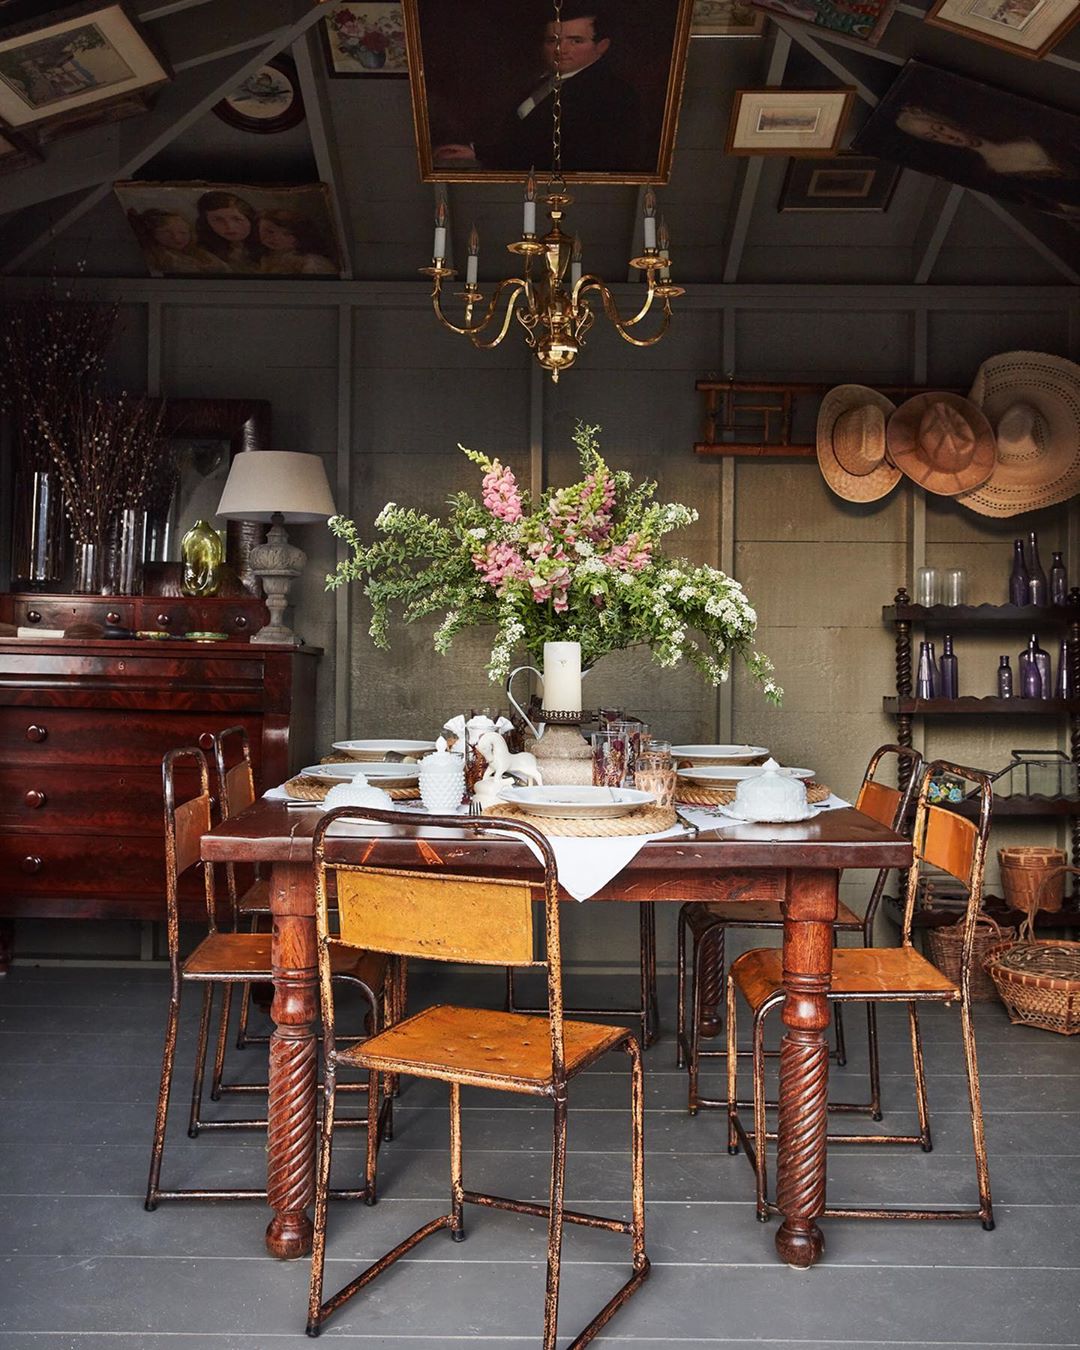 She Shed Dining Space Set Up with Antique Dining Room Table and Chairs. Photo by Instagram user @georgantas.design